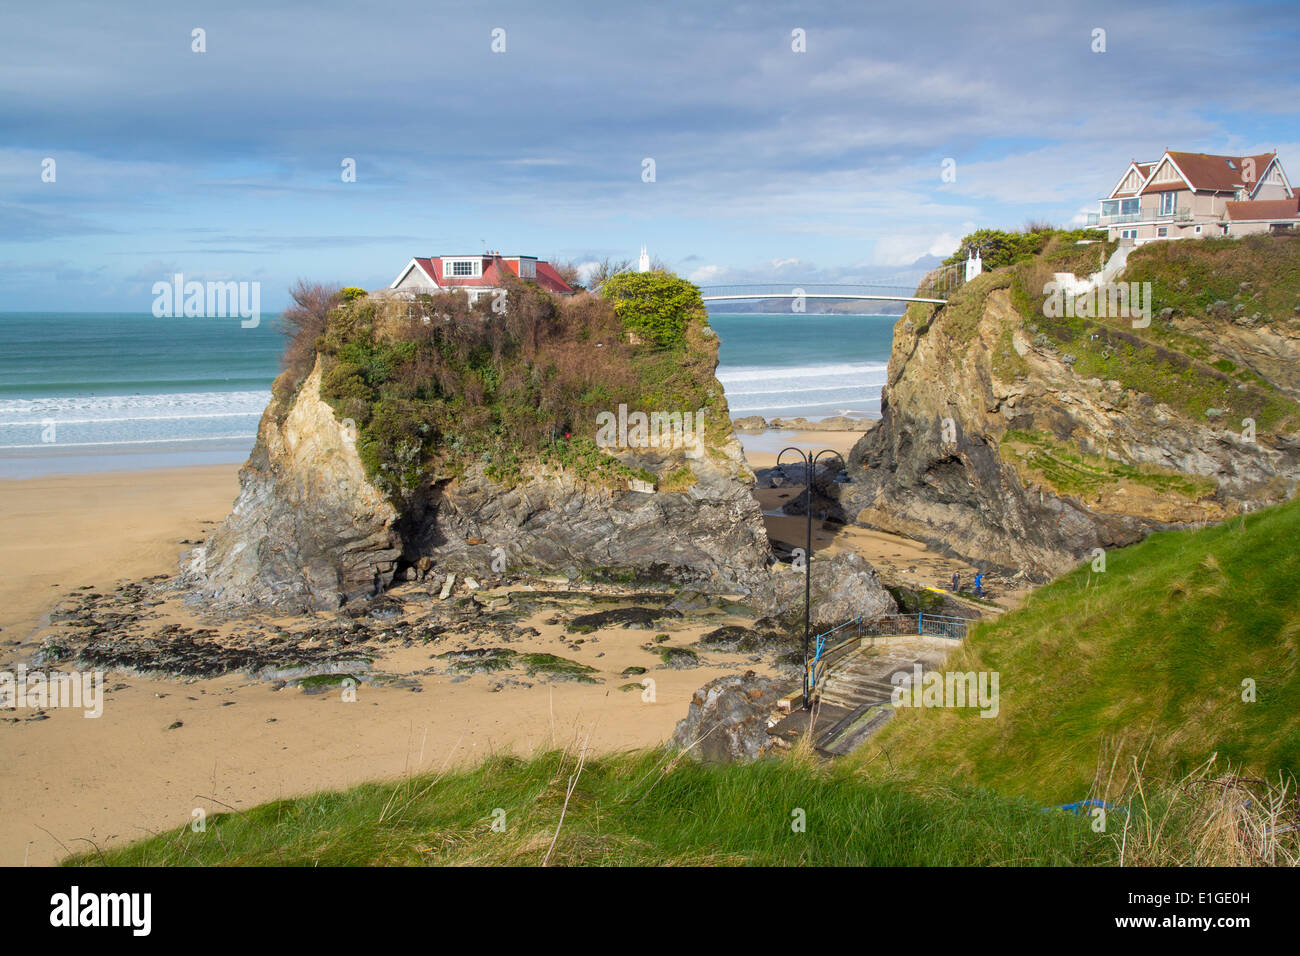 The Island on Town Beach at Newquay Cornwall England UK Europe Stock Photo